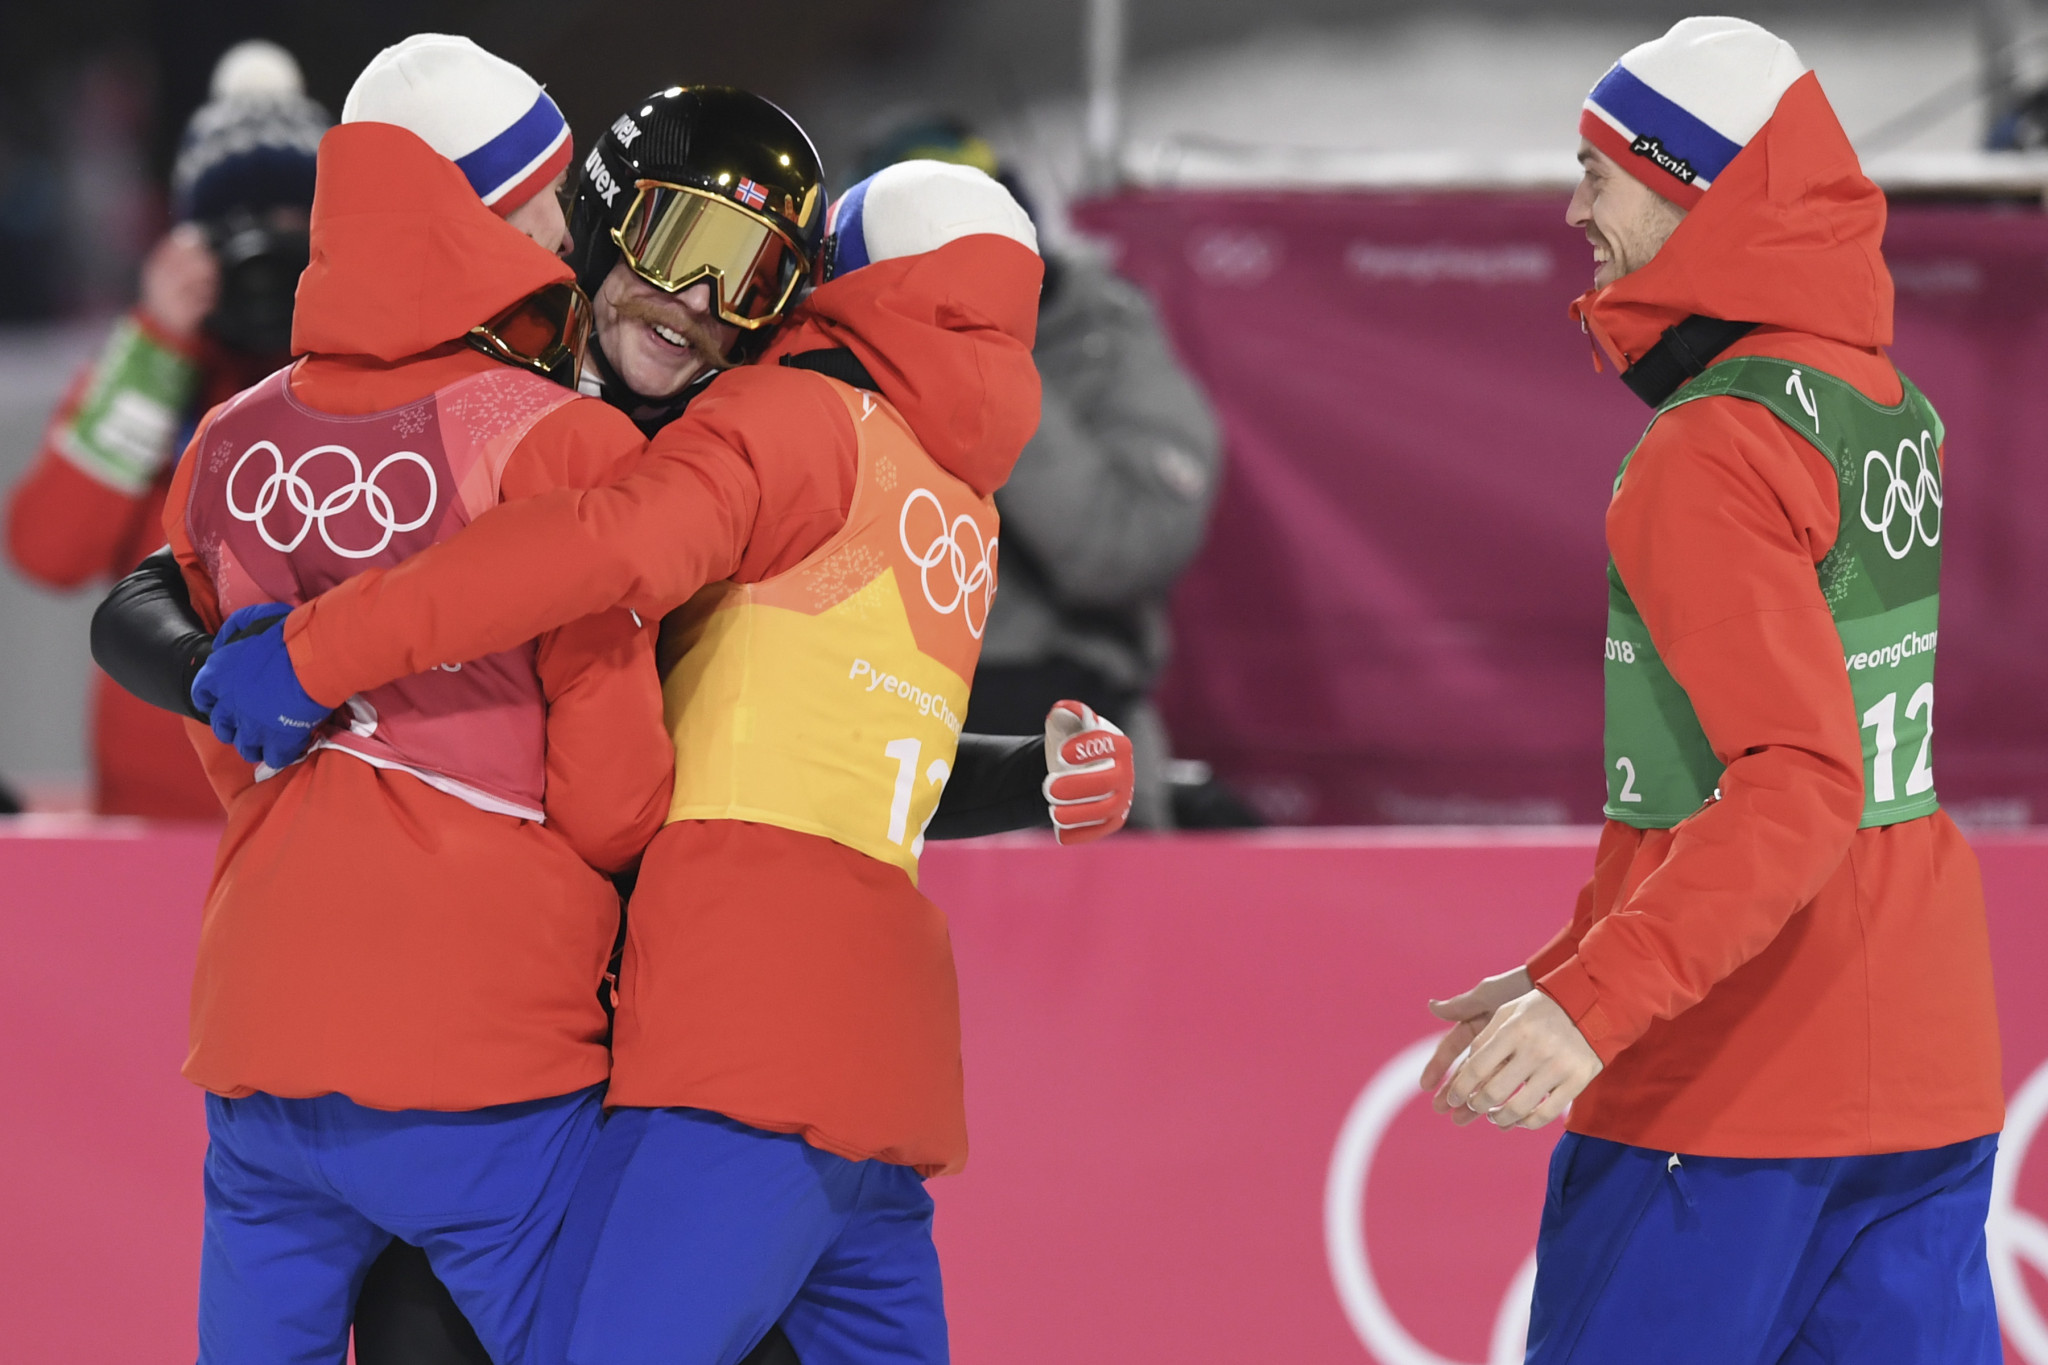 The same Norwegian quartet celebrate team gold at Pyeongchang 2018 last month ©Getty Images